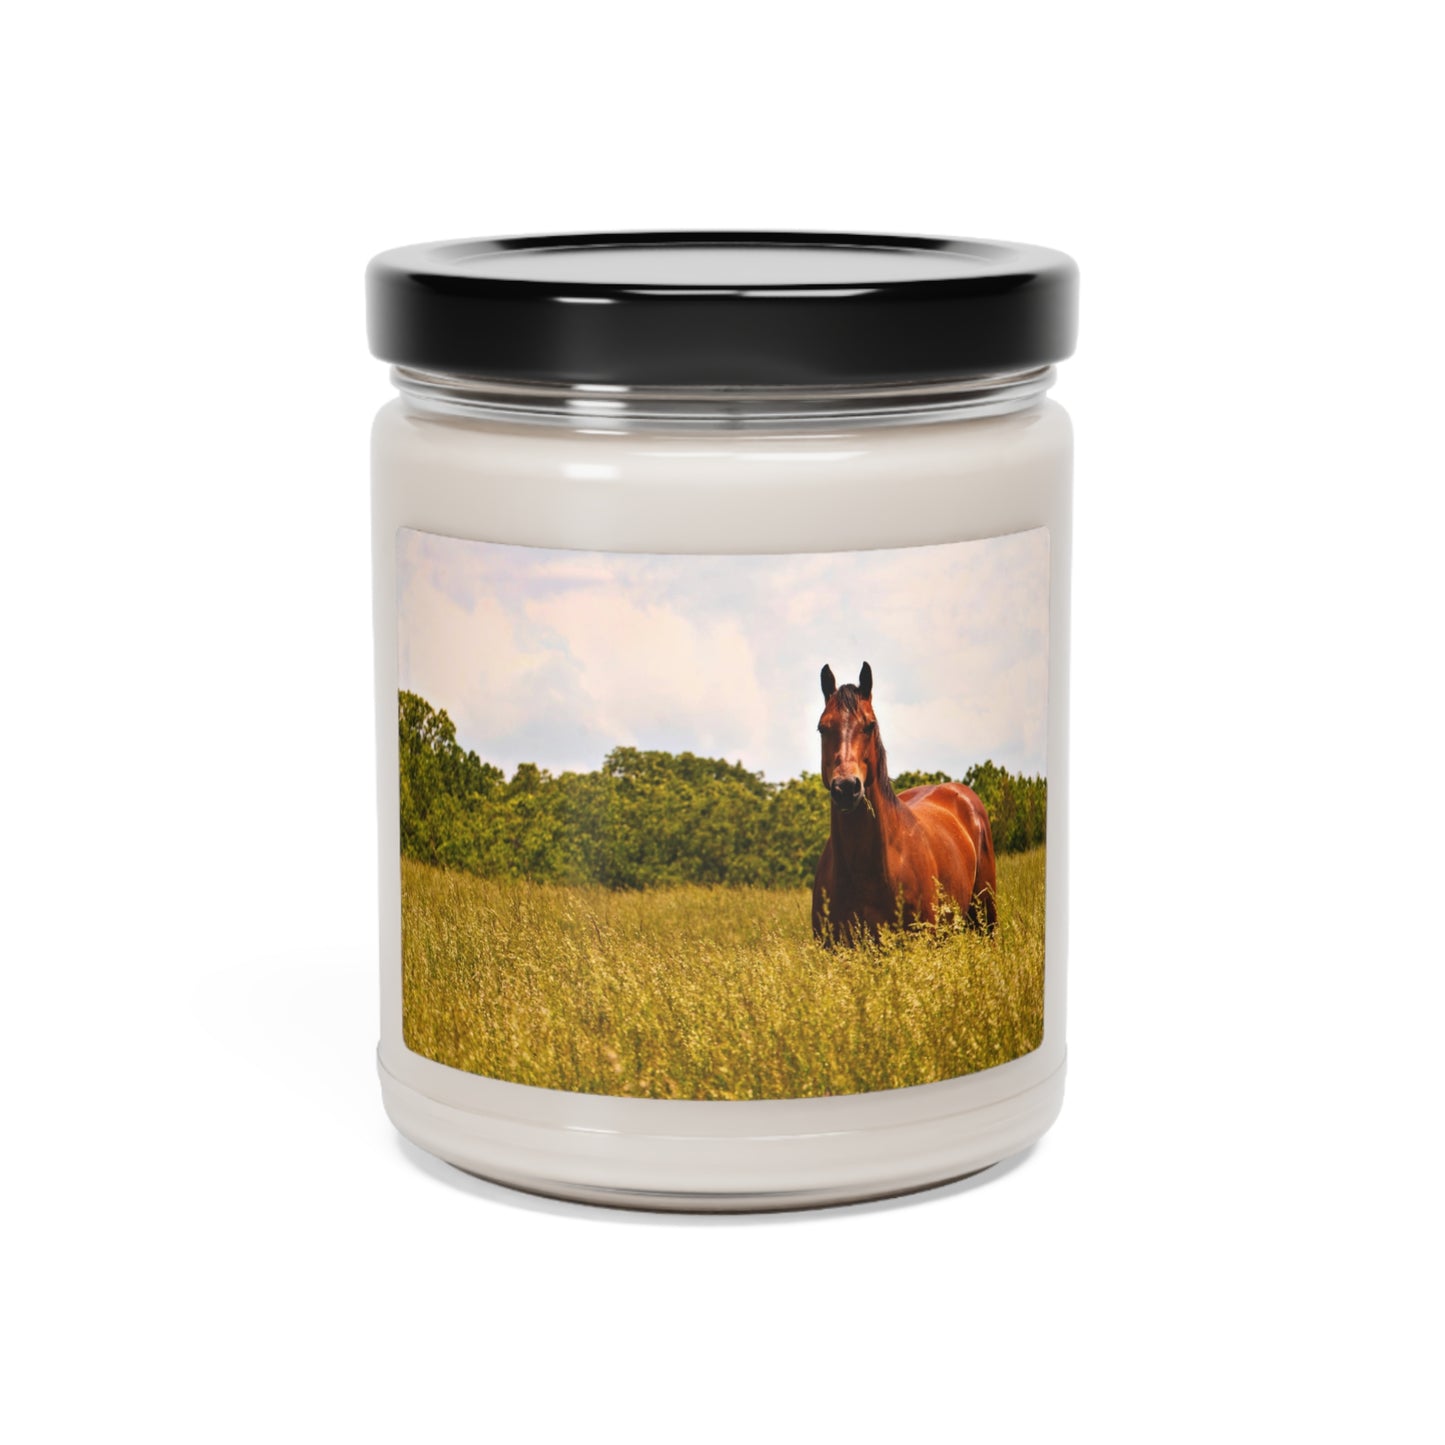 Western Cowboy Horse Photo Scented Soy Candle, 9oz